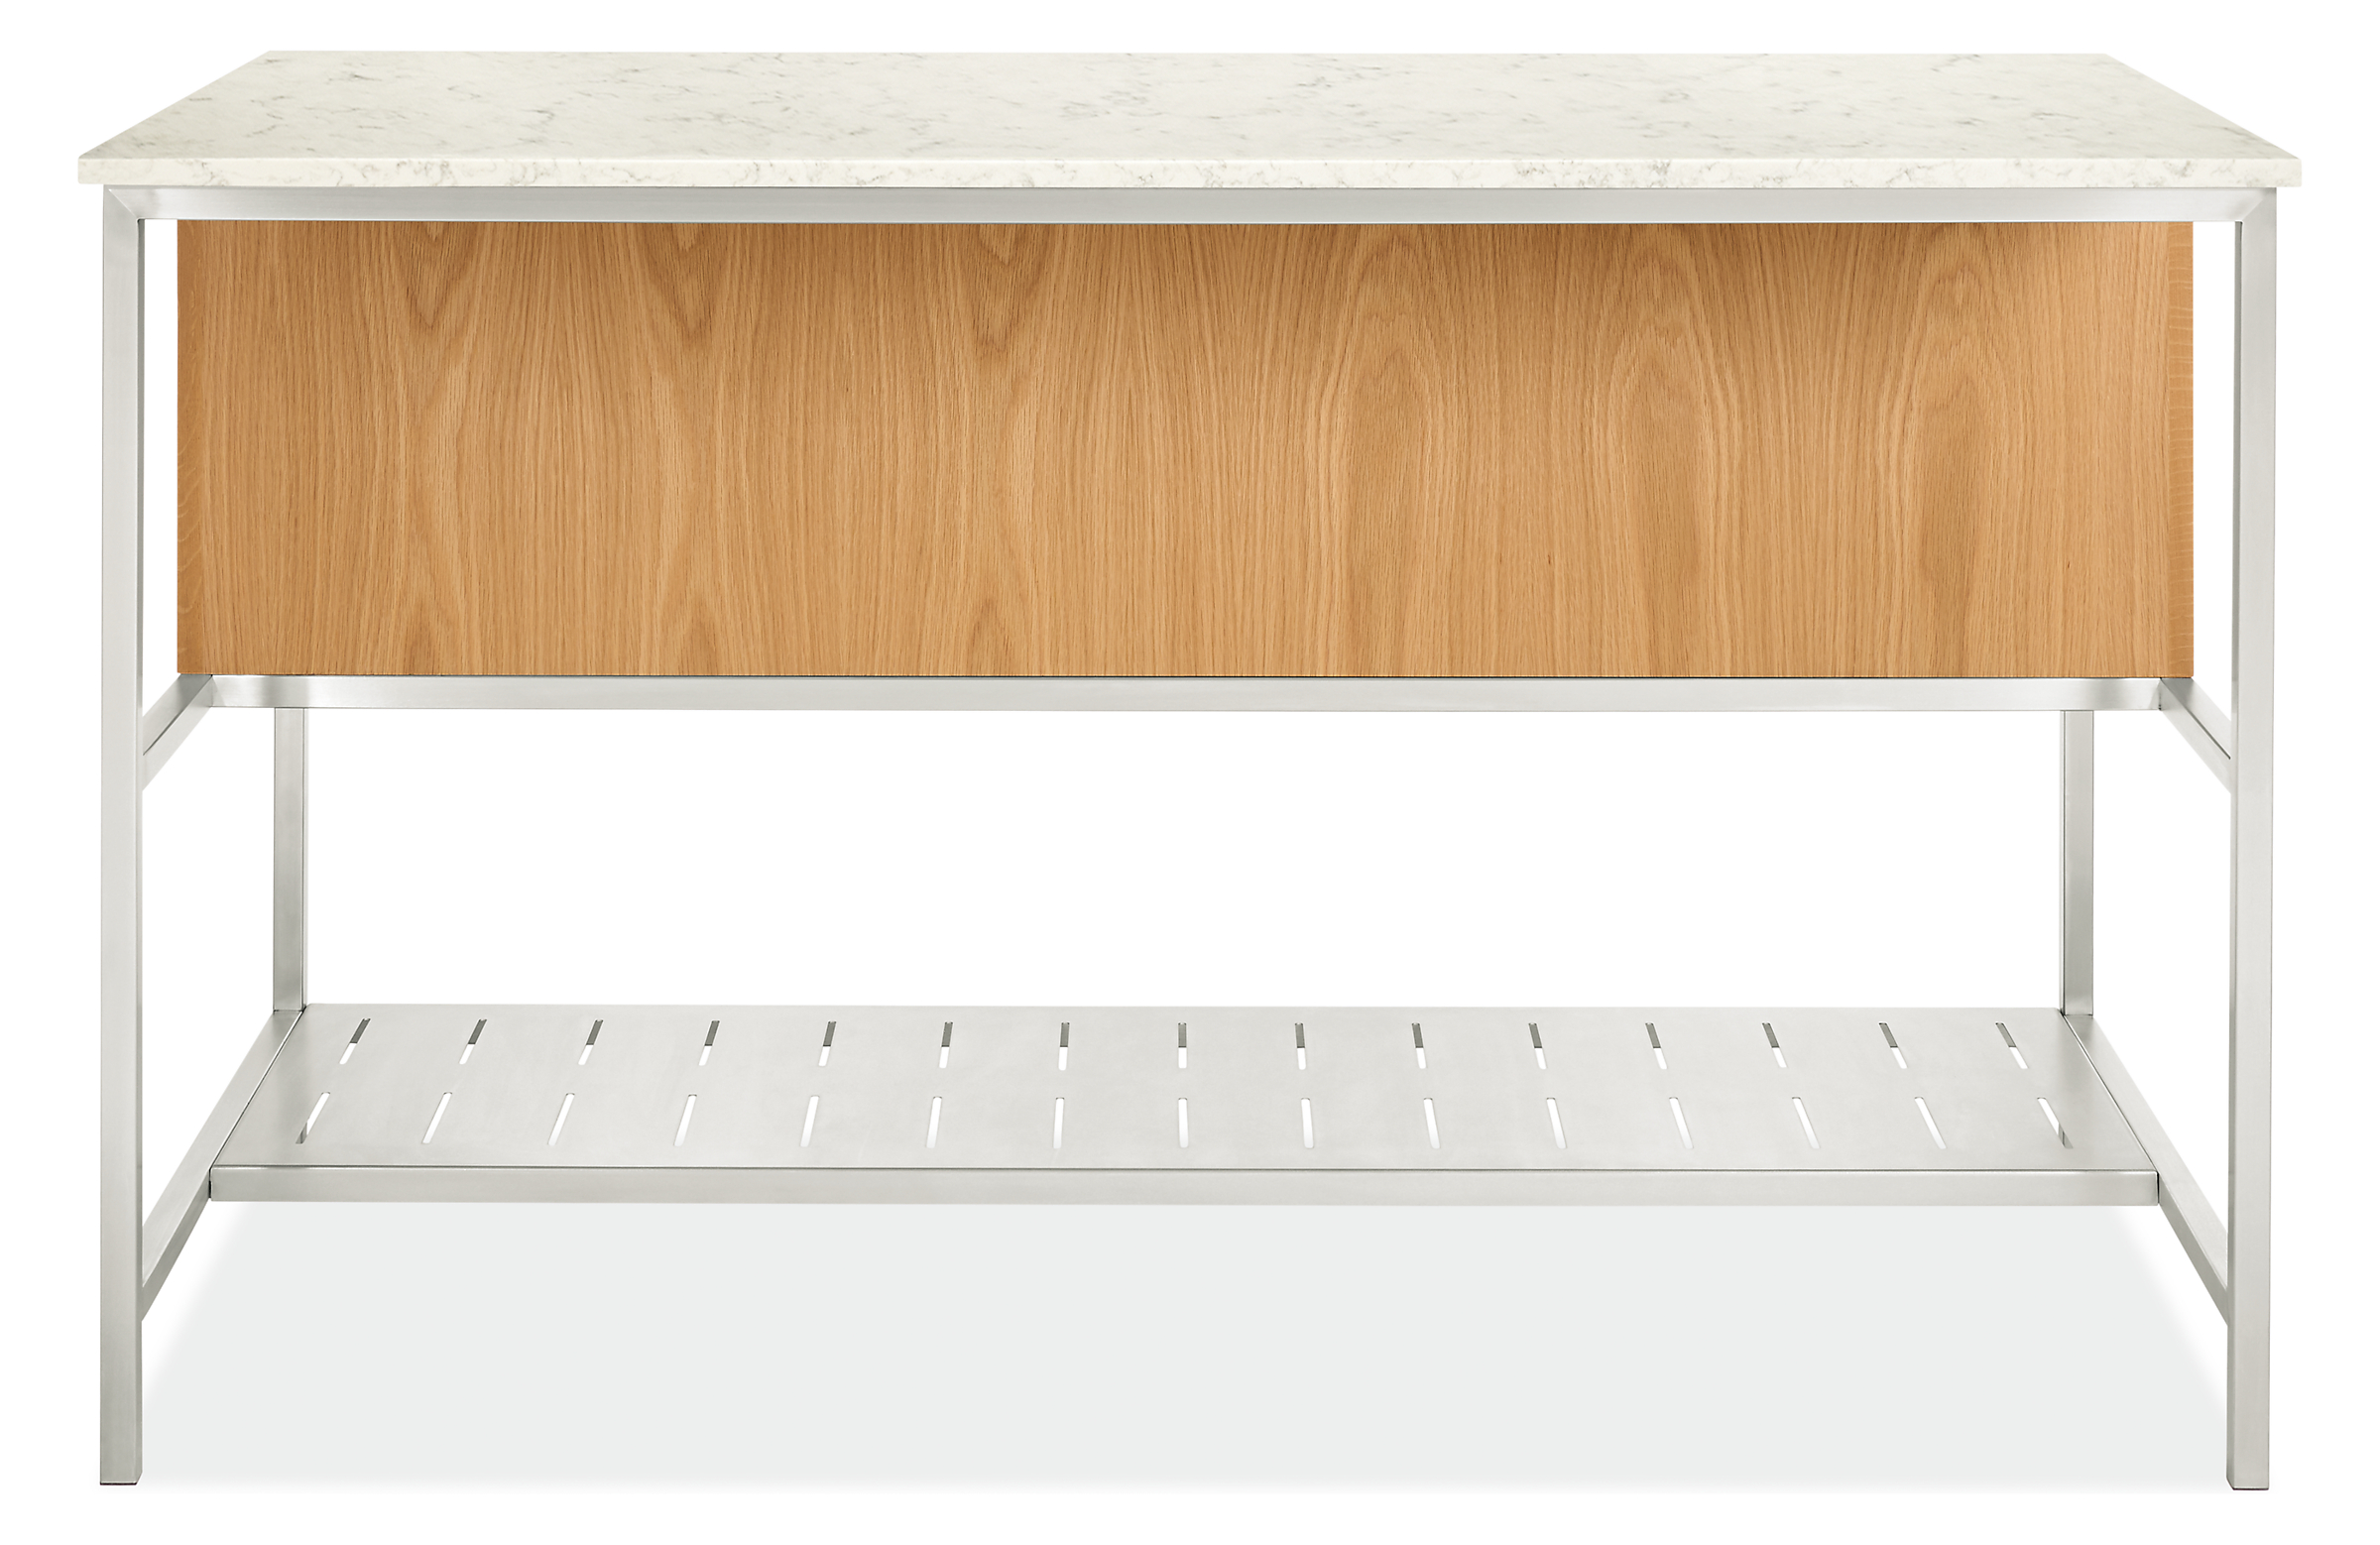 Back view of Booker 60-wide Four-Drawer Kitchen Island with Narrow Shelf in White Oak with Marbled White Quartz top.